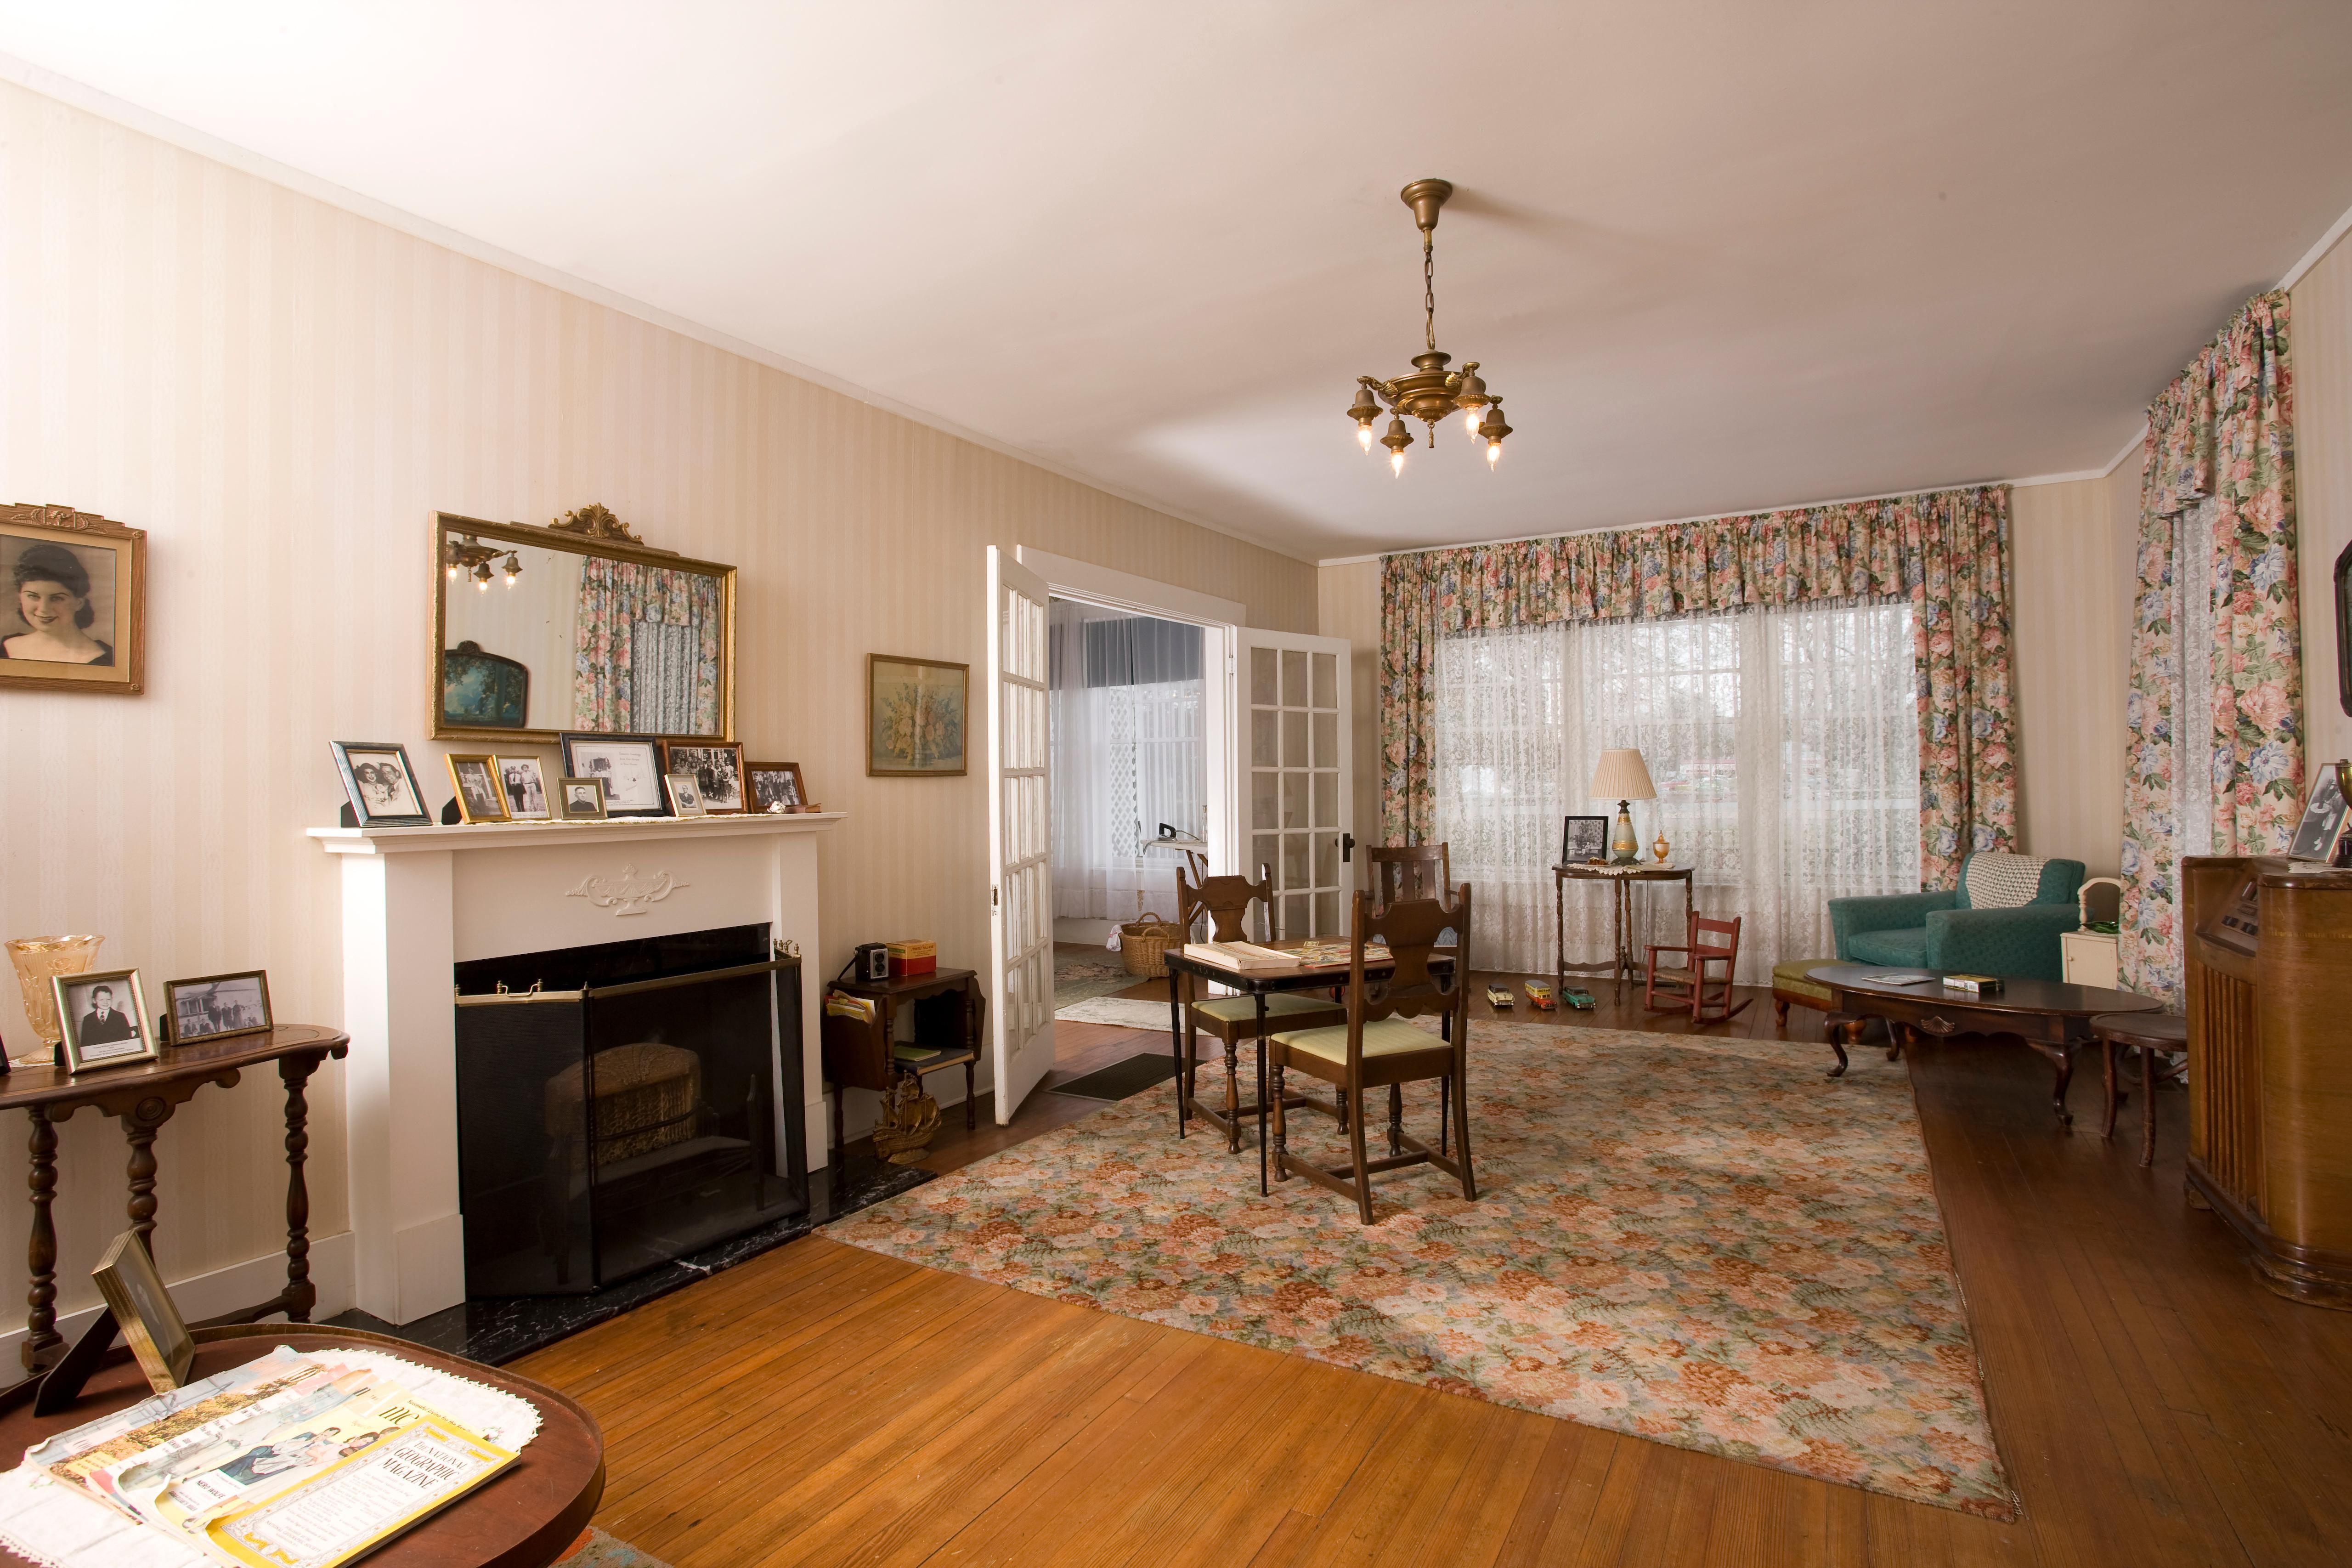 The living room inside the Clinton Birthplace Home